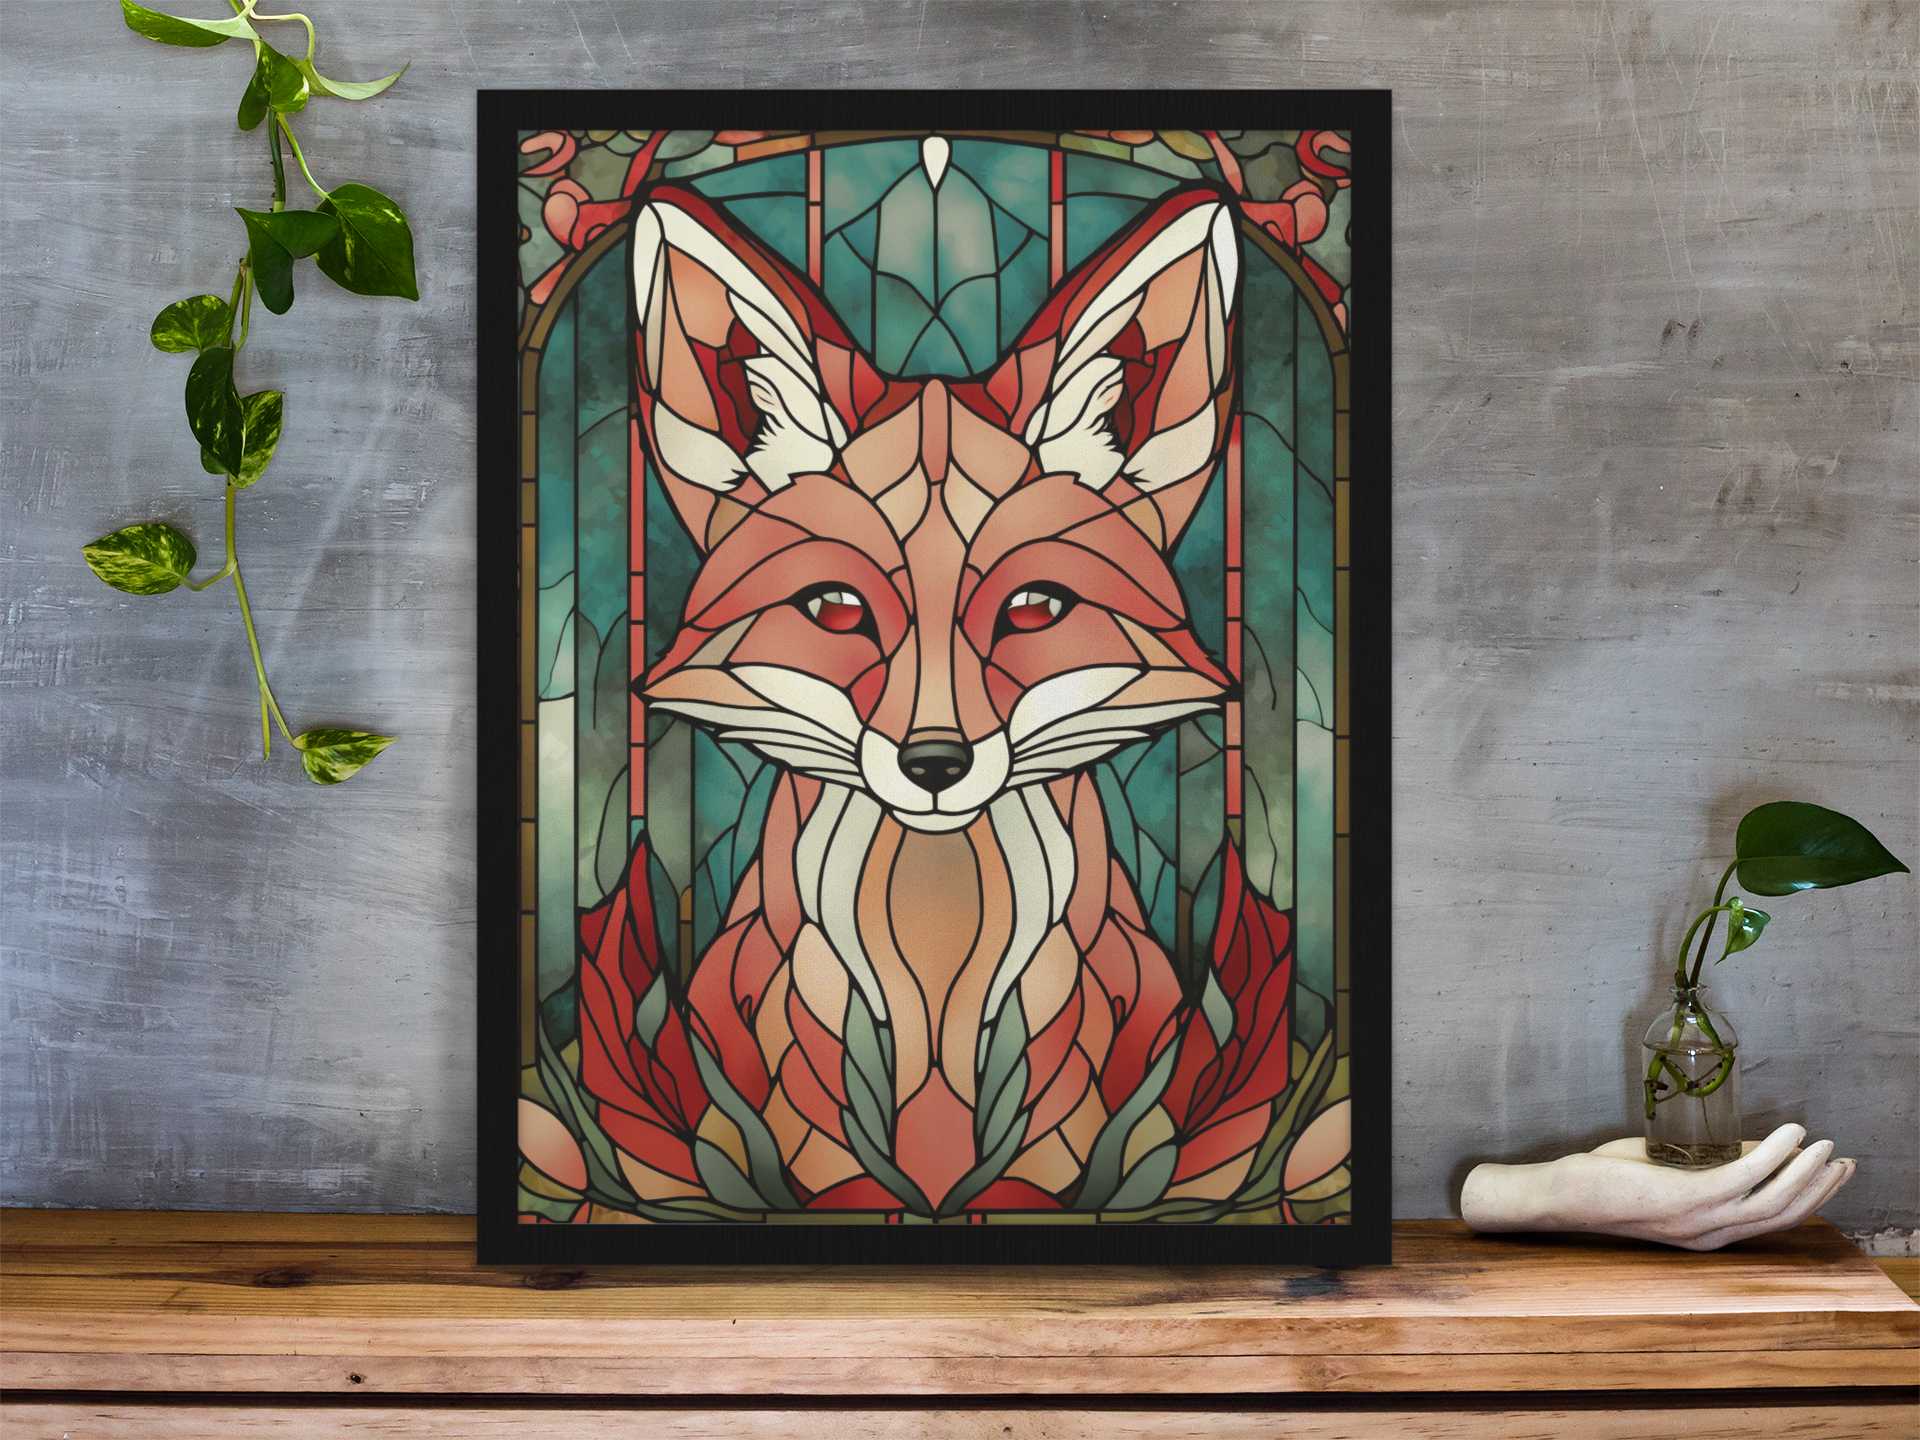 Flaming fox - Poster - Ever colorful